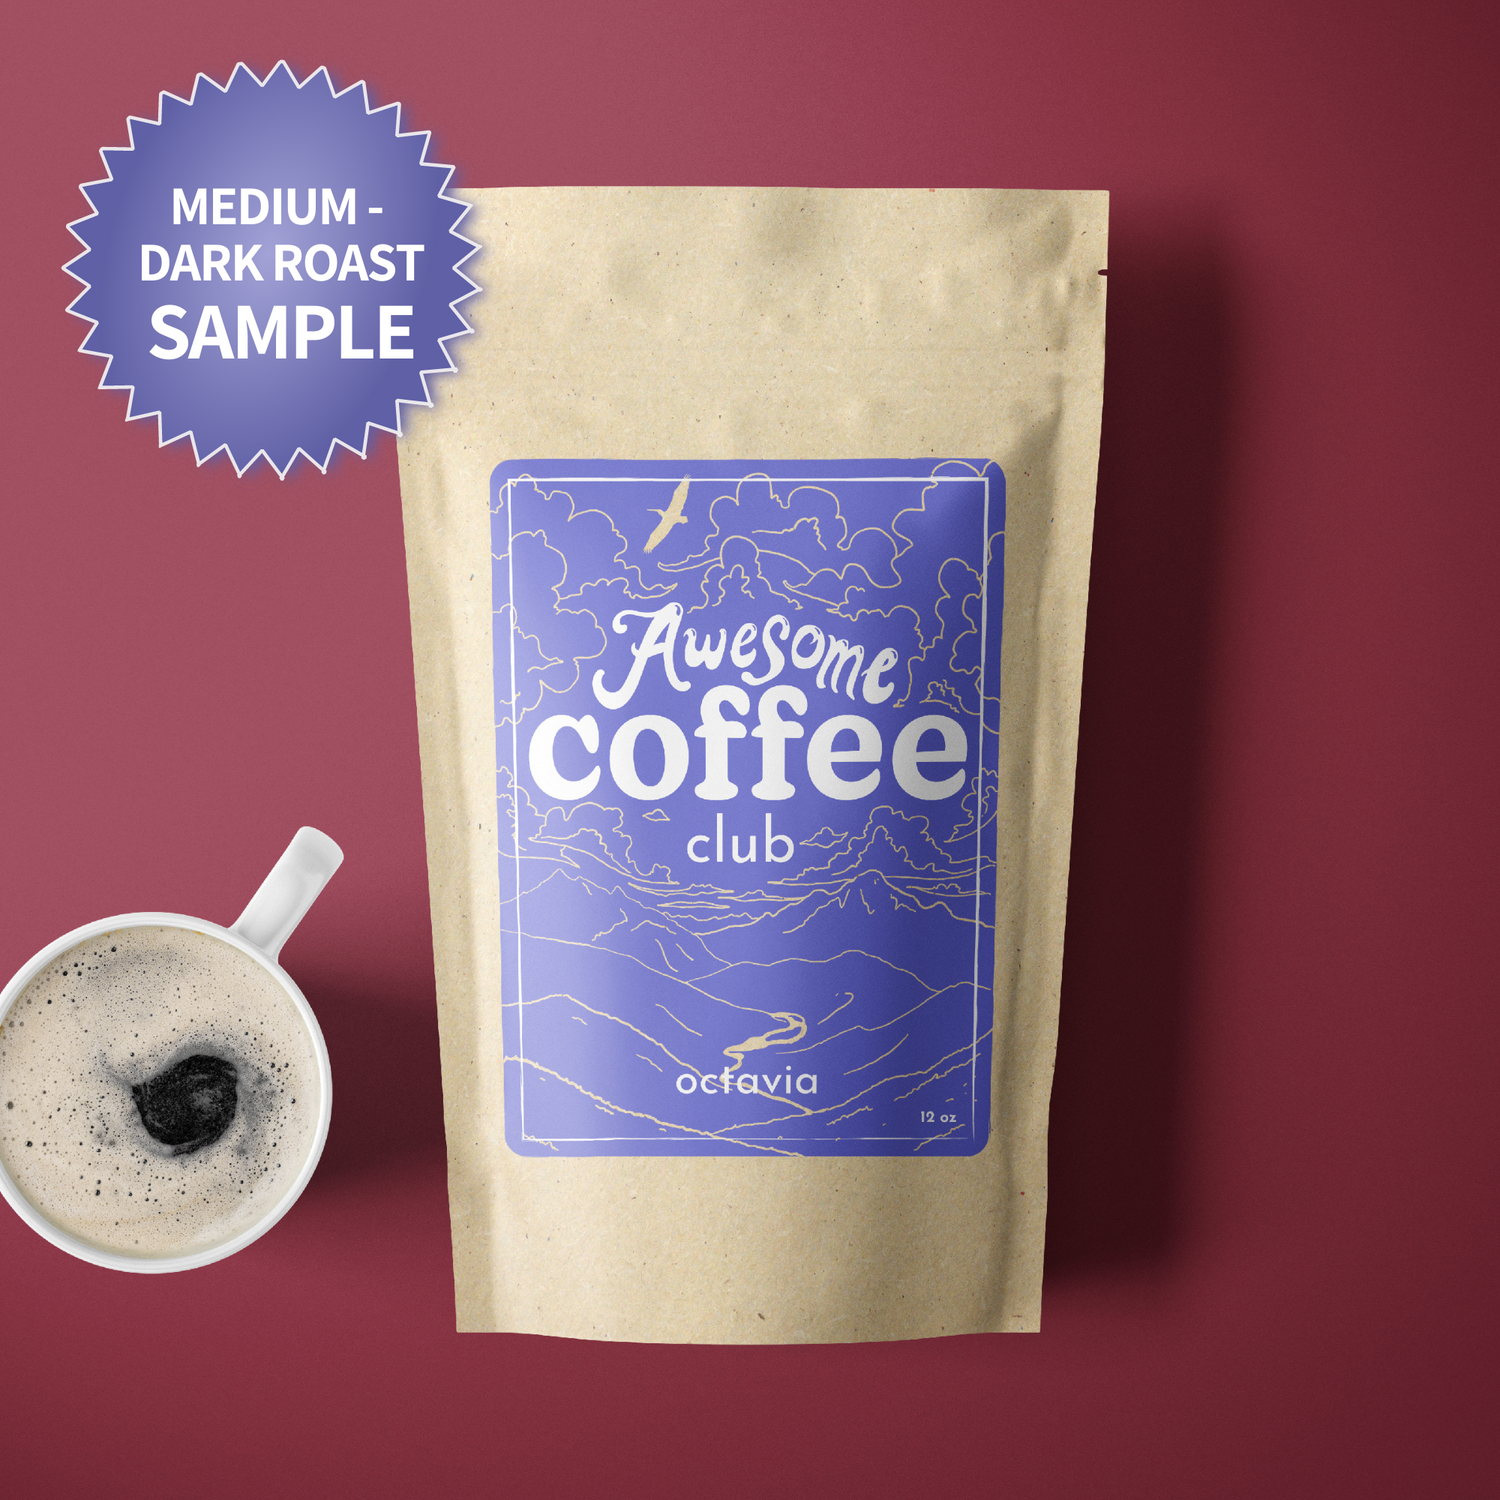 A photo of a brown bag of coffee with a light purple label that shows a mountain scene and has the text "Awesome Coffee Club; Octavia". The bag sites atop a maroon background with a cup of coffee next to it. There is a purple badge in the lefthand corner that reads "Medium-Dark Roast Sample". 